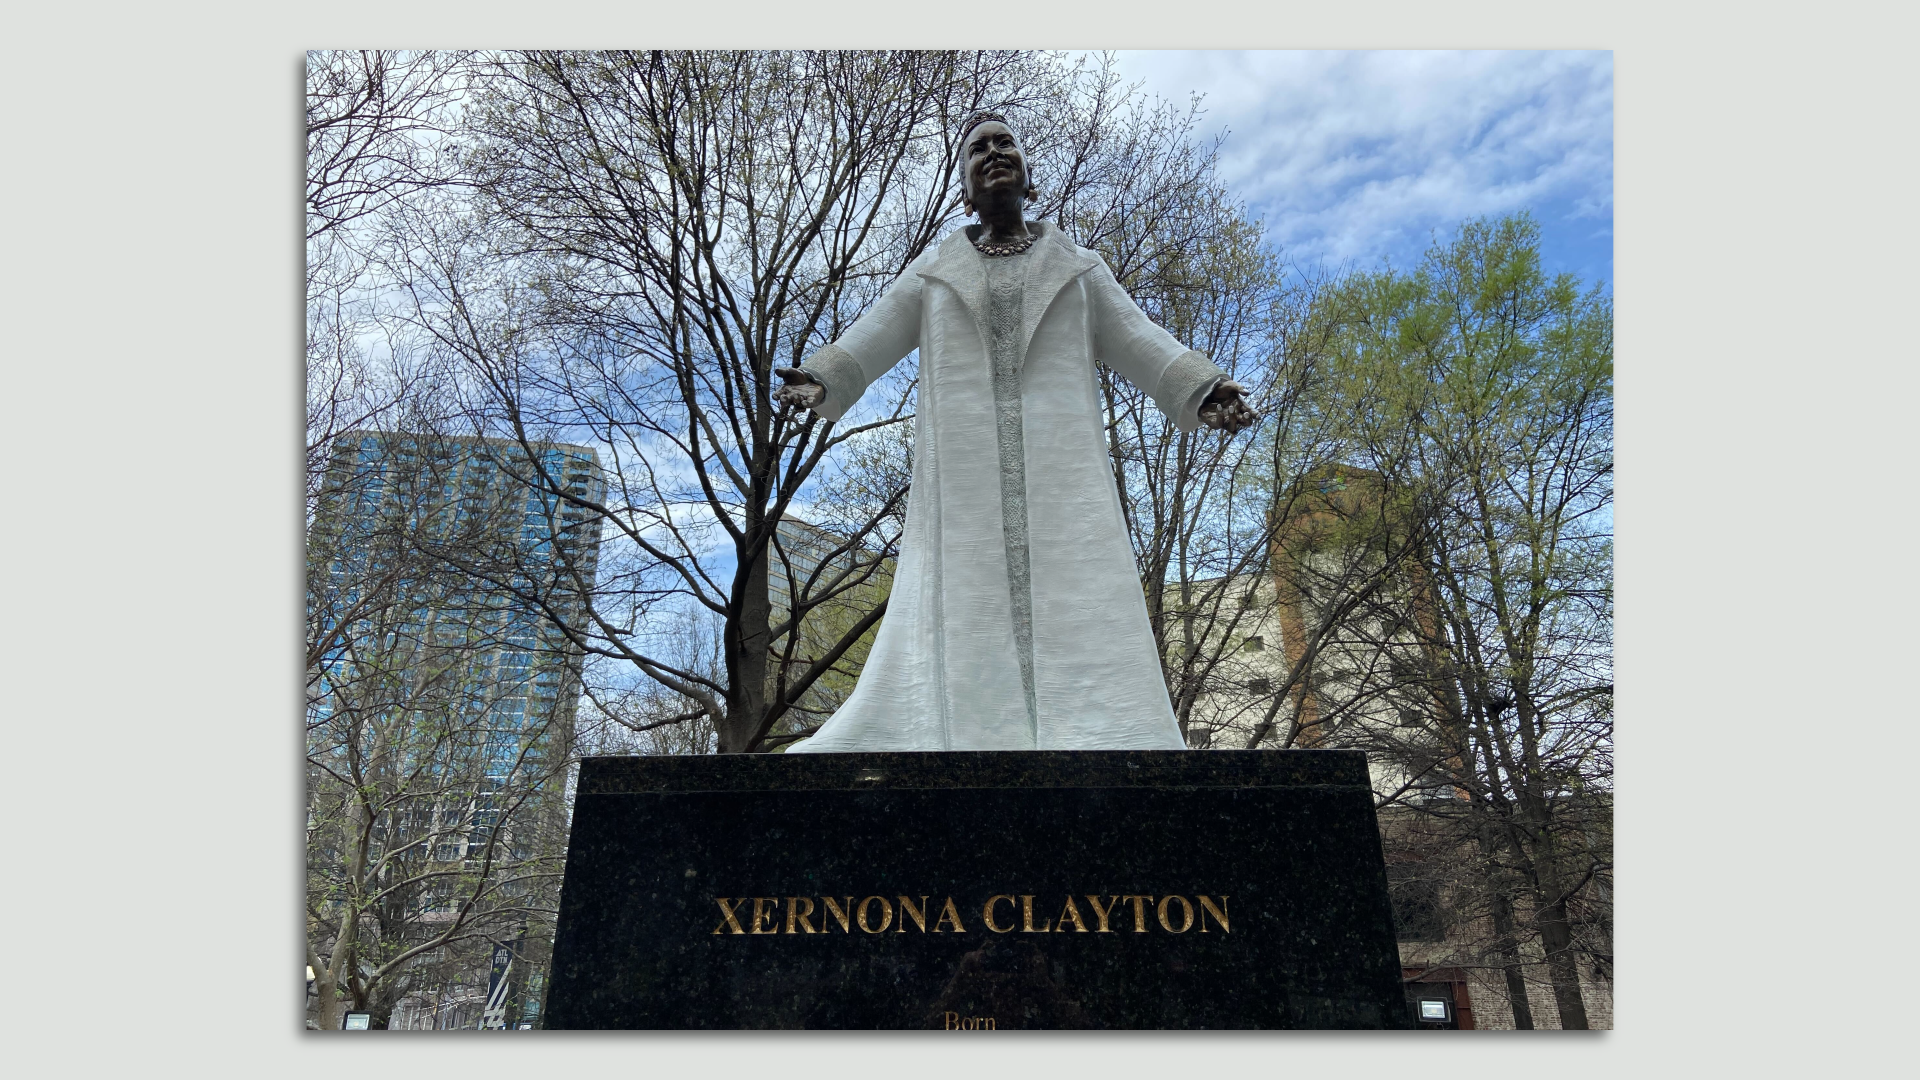 A statue of Xernora Clayton